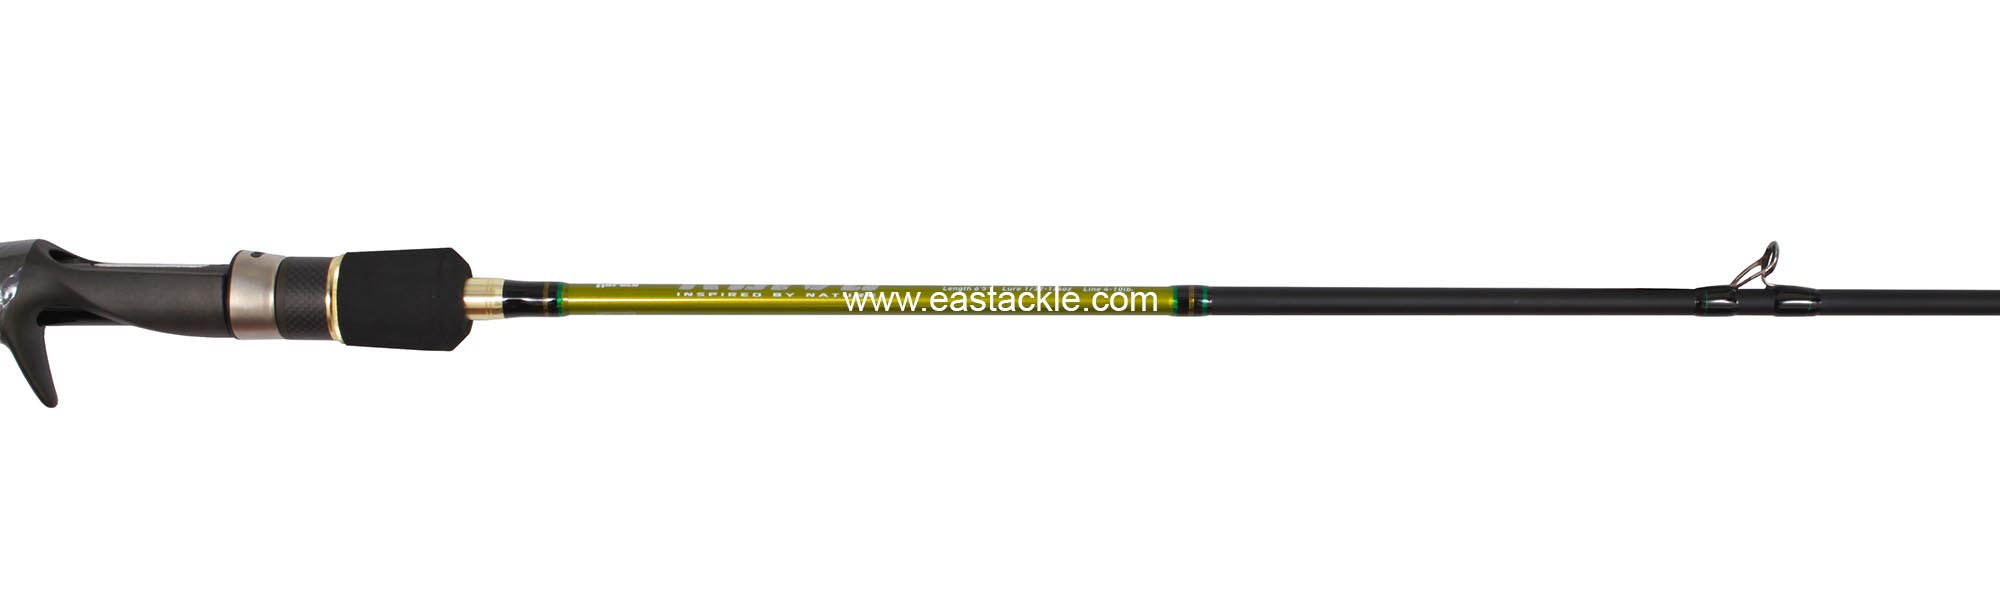 Rapala - Koivu - KVC661MH - Bait Casting Rod - Reel Seat Fore Grip to Stripper Guide (Side View) | Eastackle